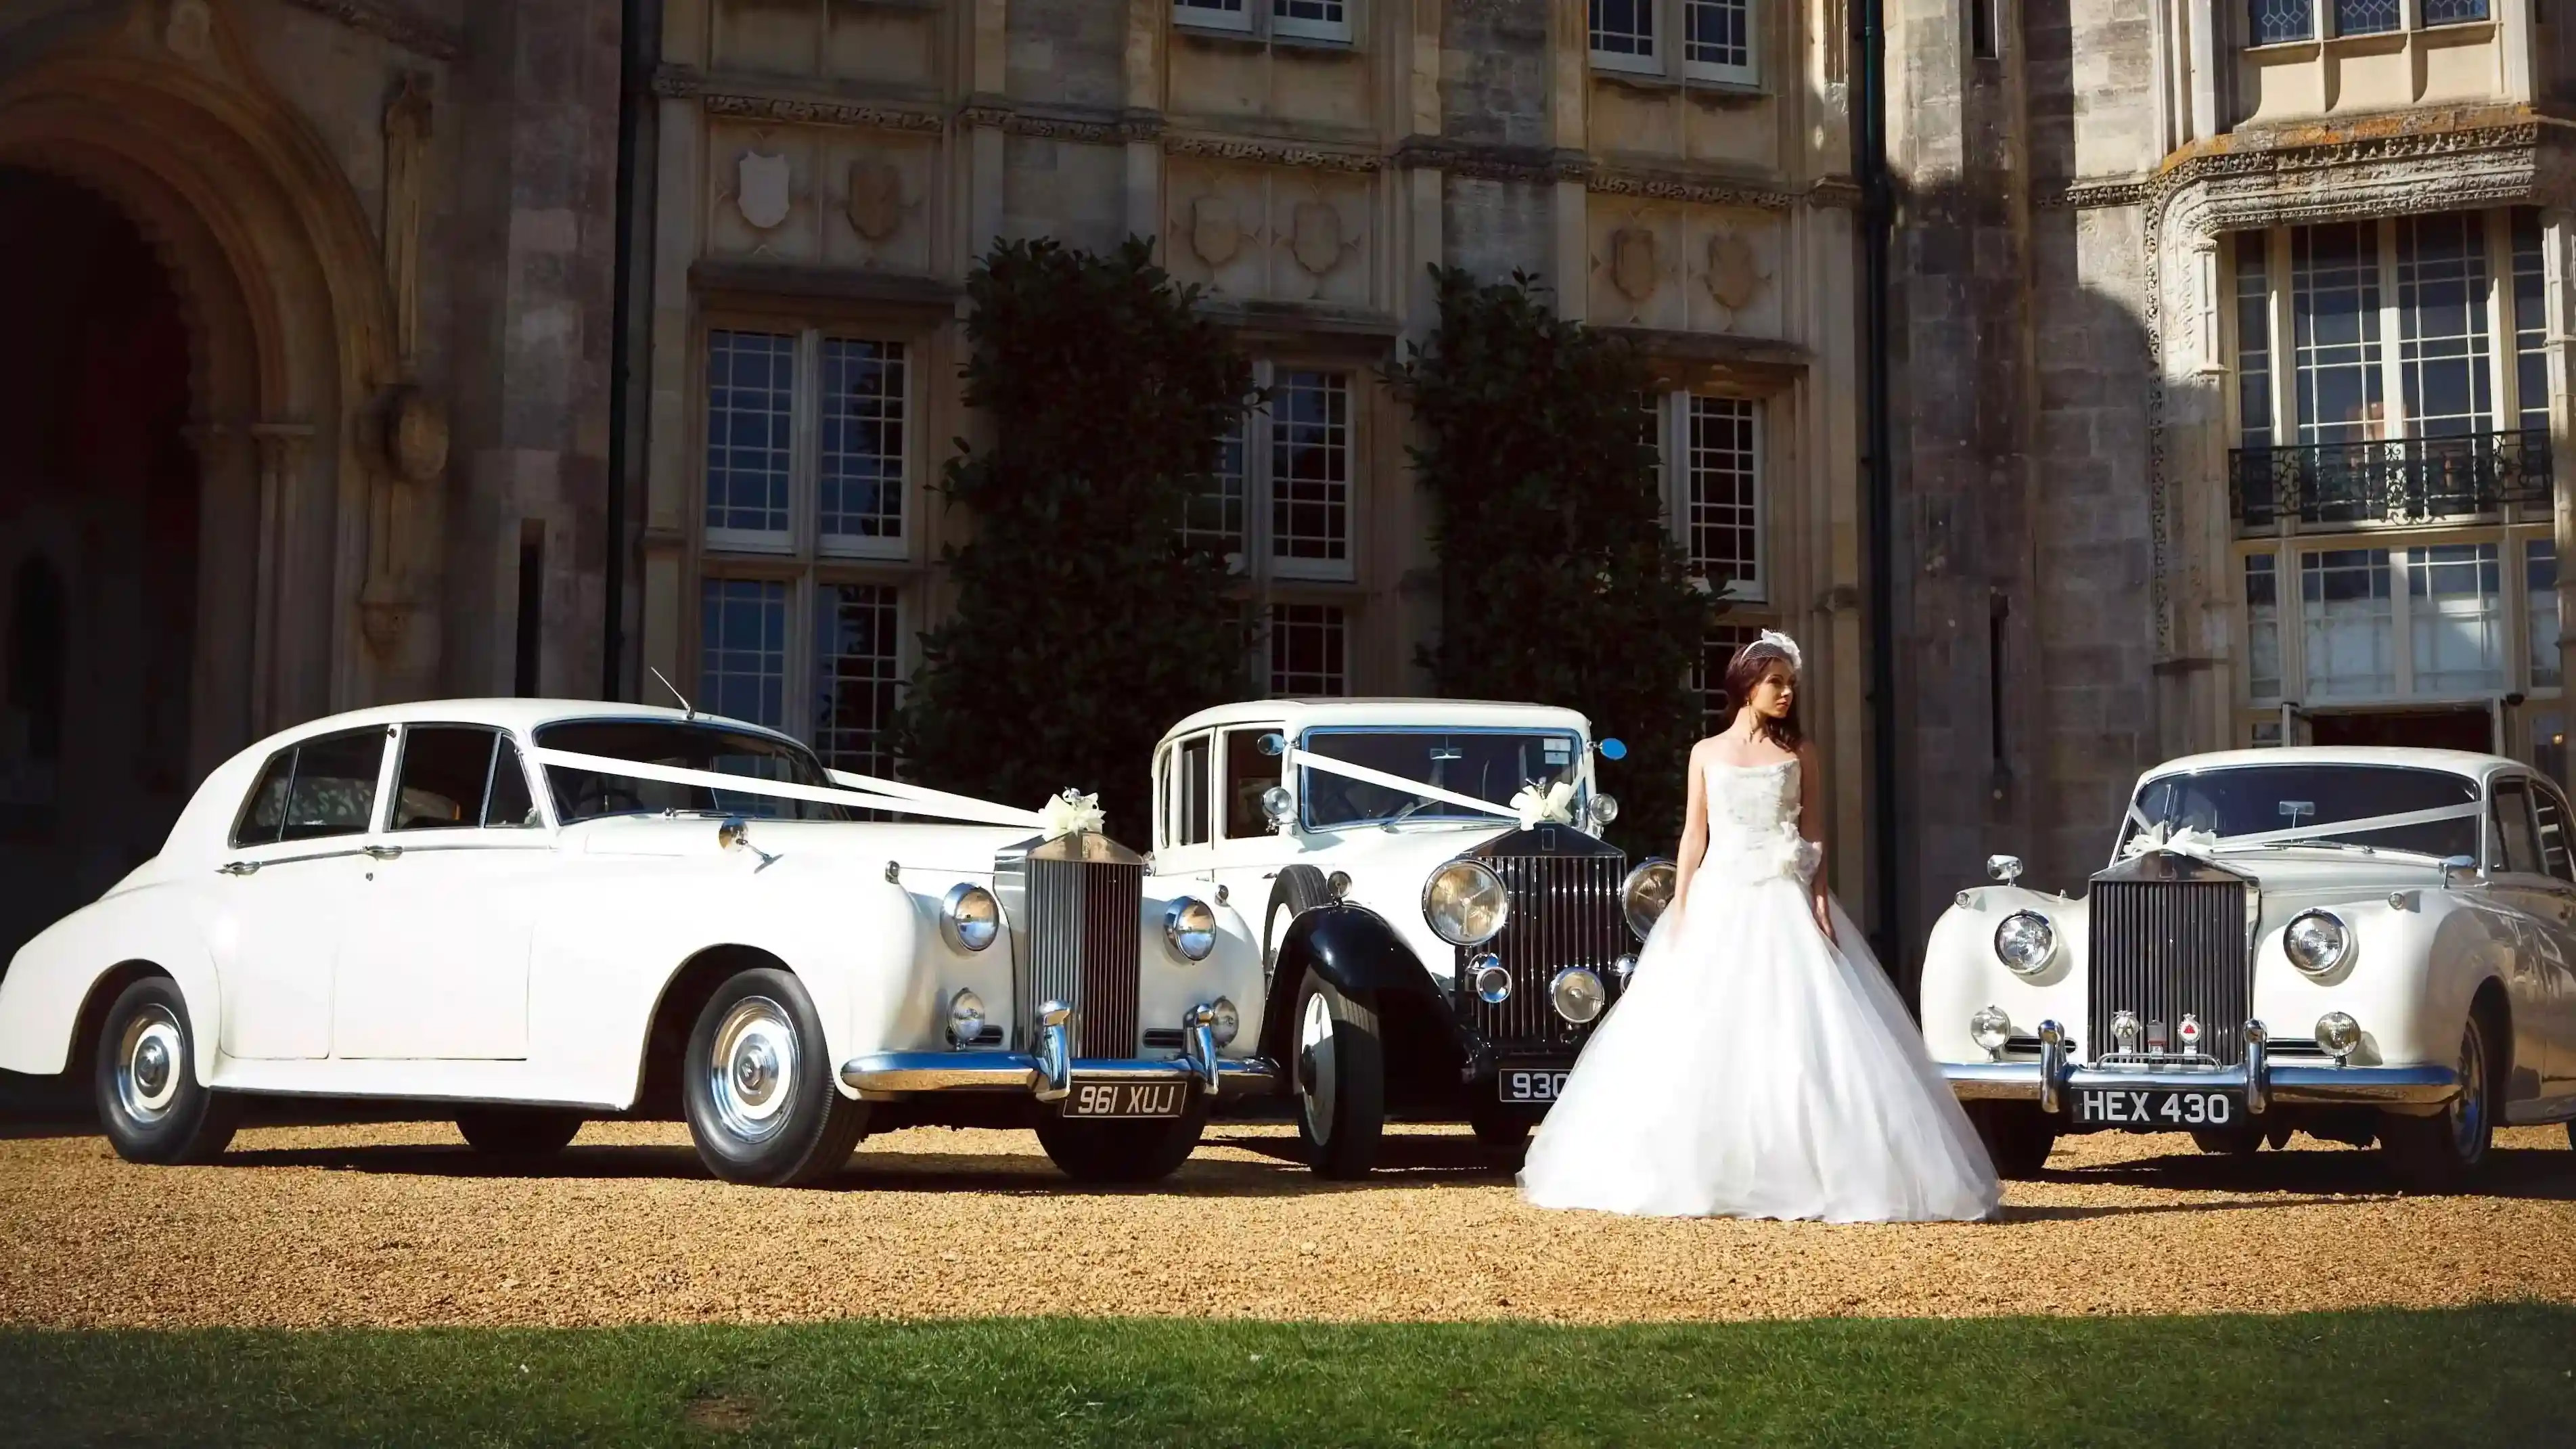 Selection of three classic and Vintage Rolls-Royce in White with Bride wearing a white wedding dress standing in the middle of the vehicles. Background is a popular wedding venue in the style of a castle in Sussex